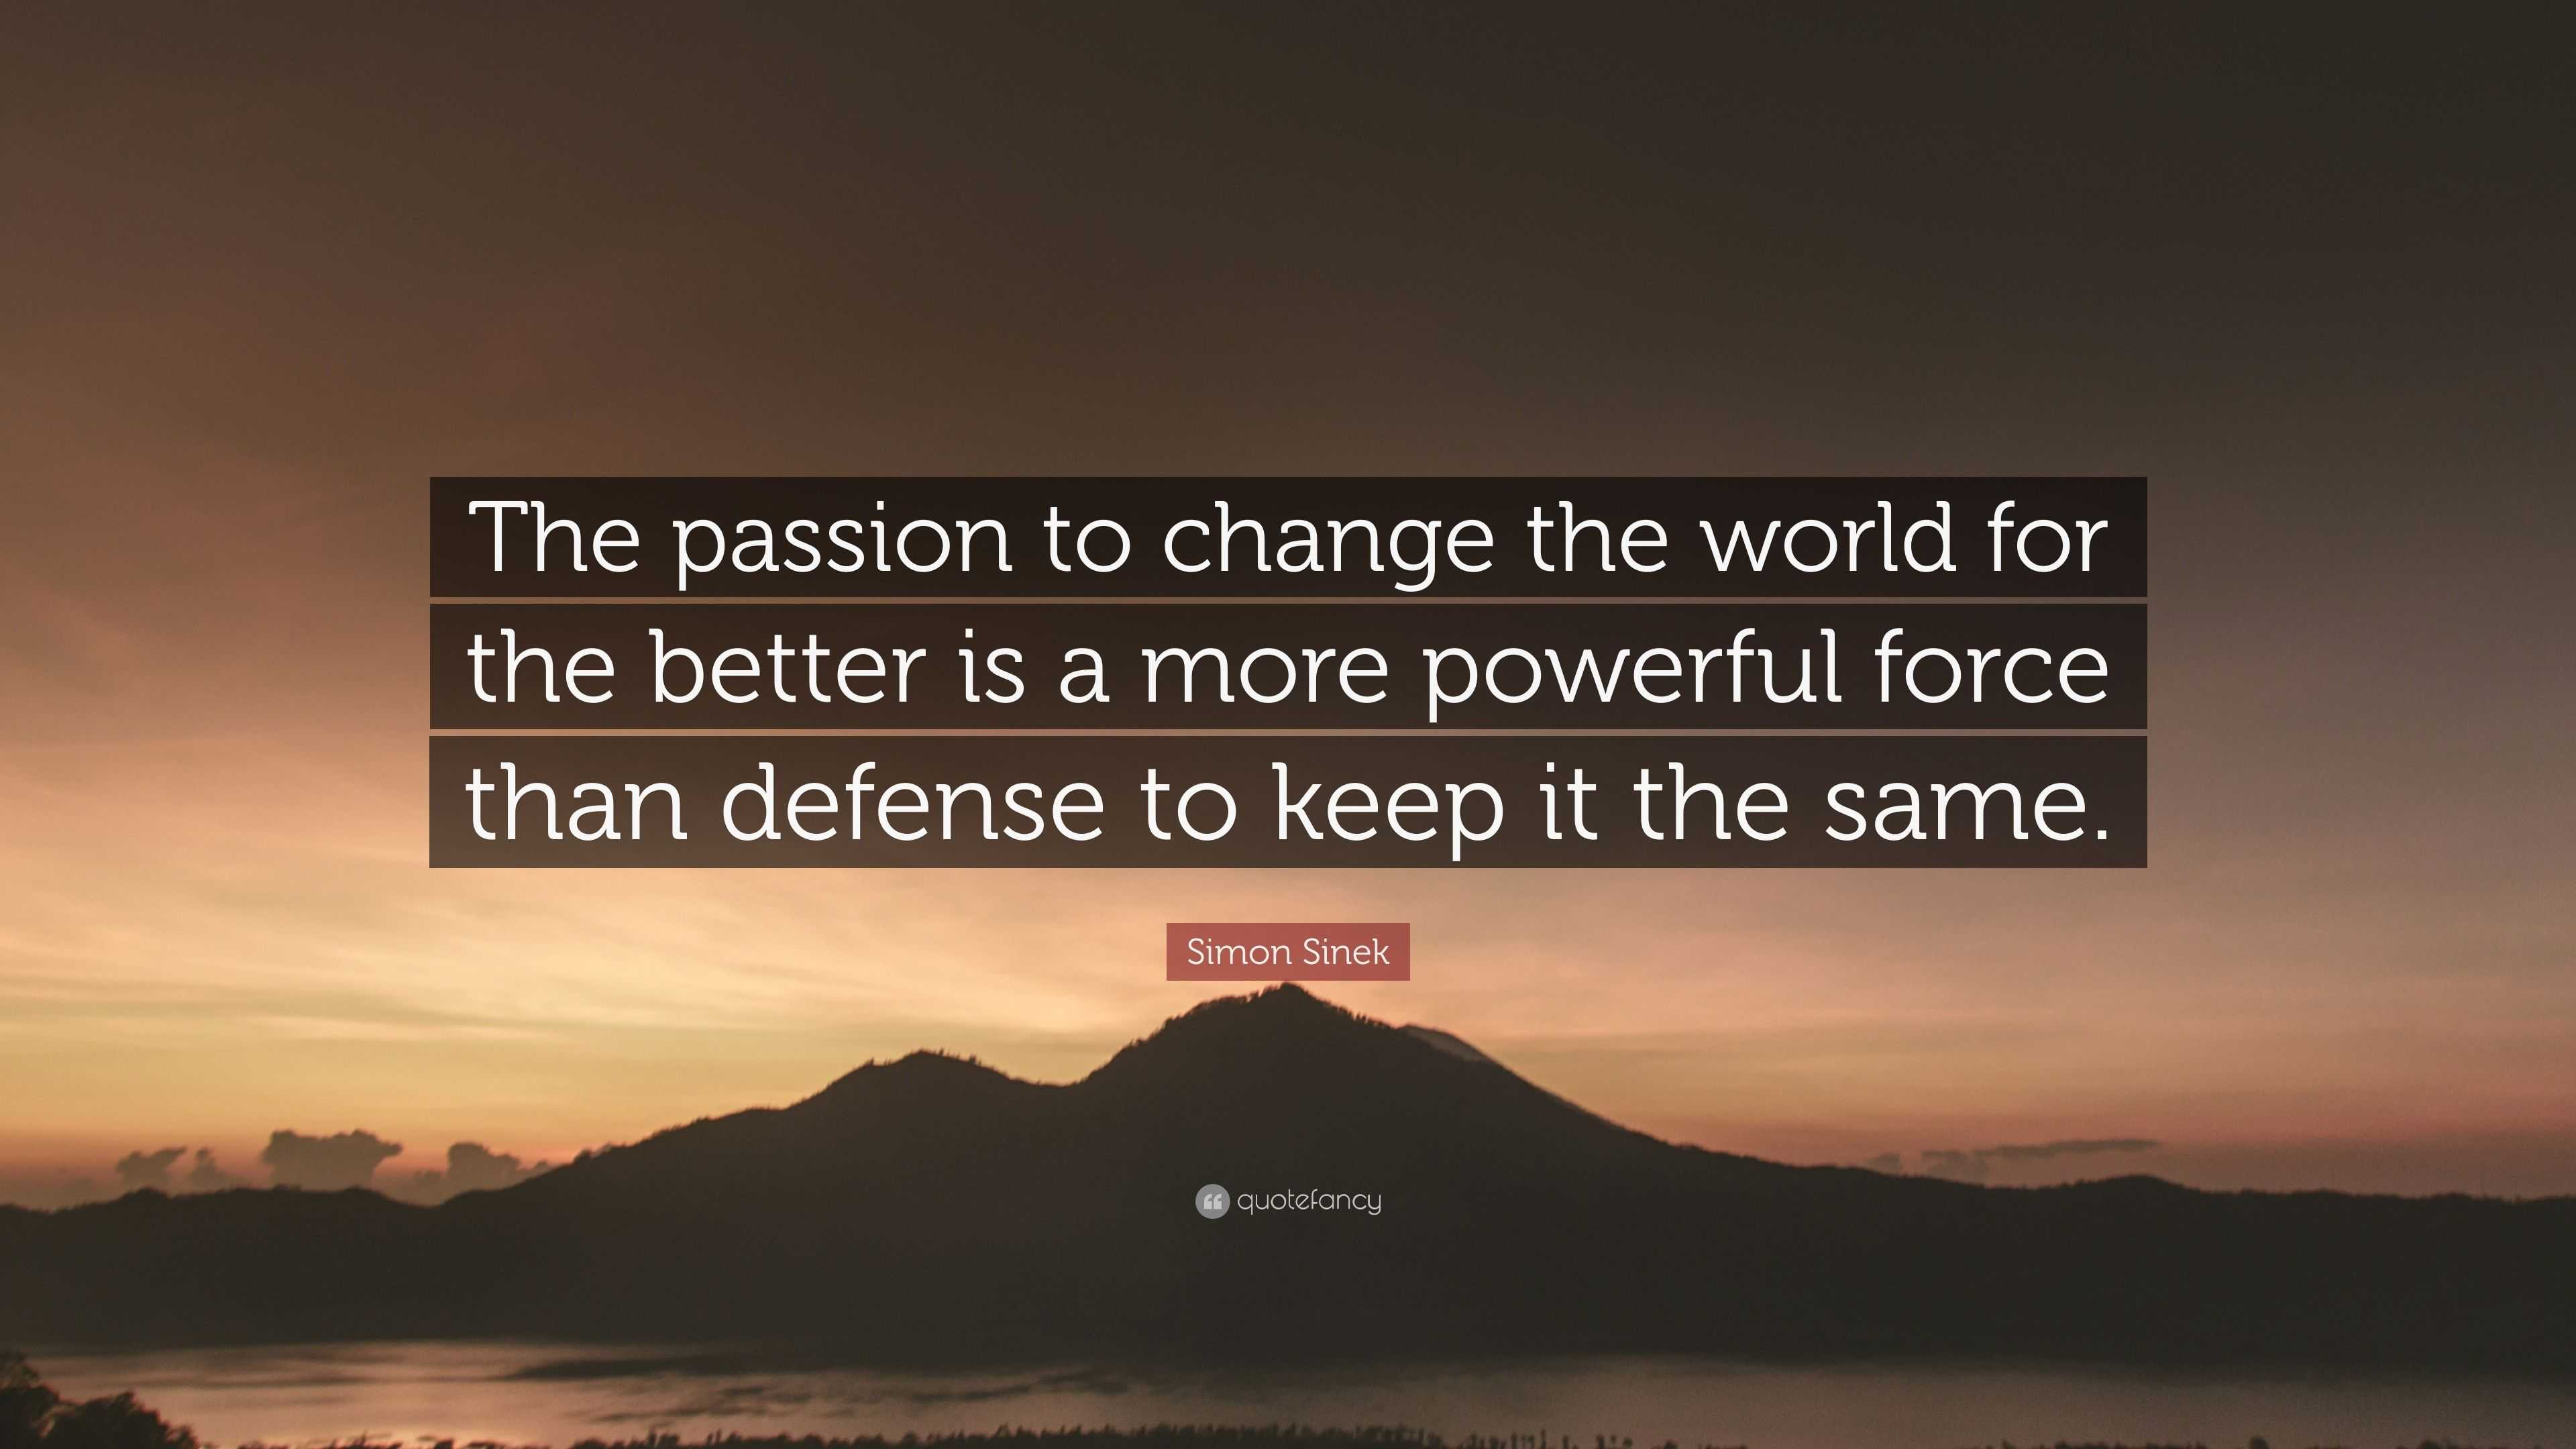 Simon Sinek Quote: “The passion to change the world for the better is a ...